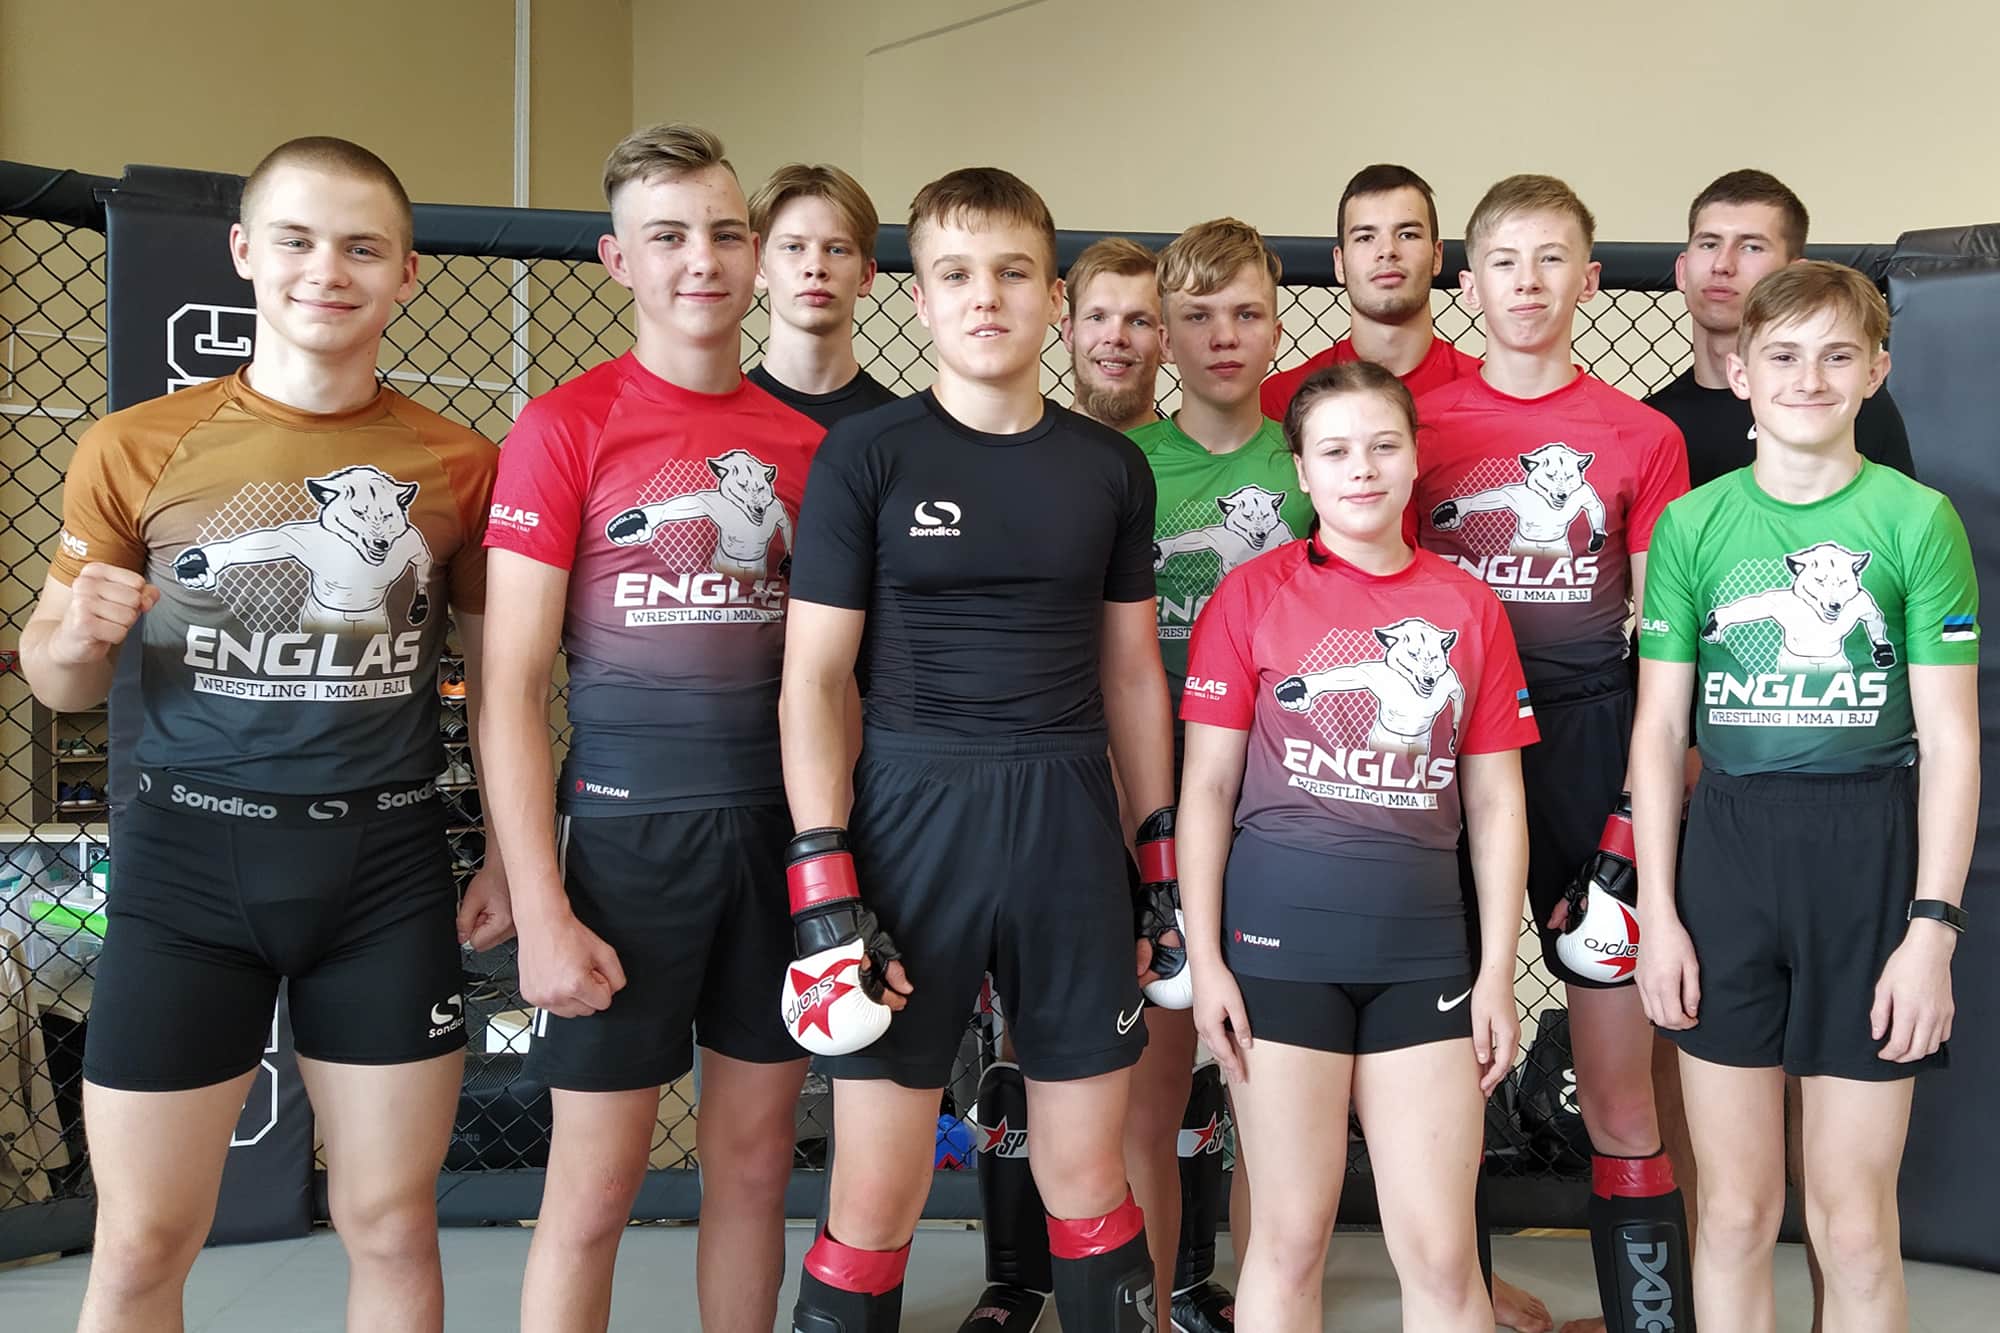 Estonian MMA Urges for National Olympic Approval for Athletes to Train During COVID Lockdown